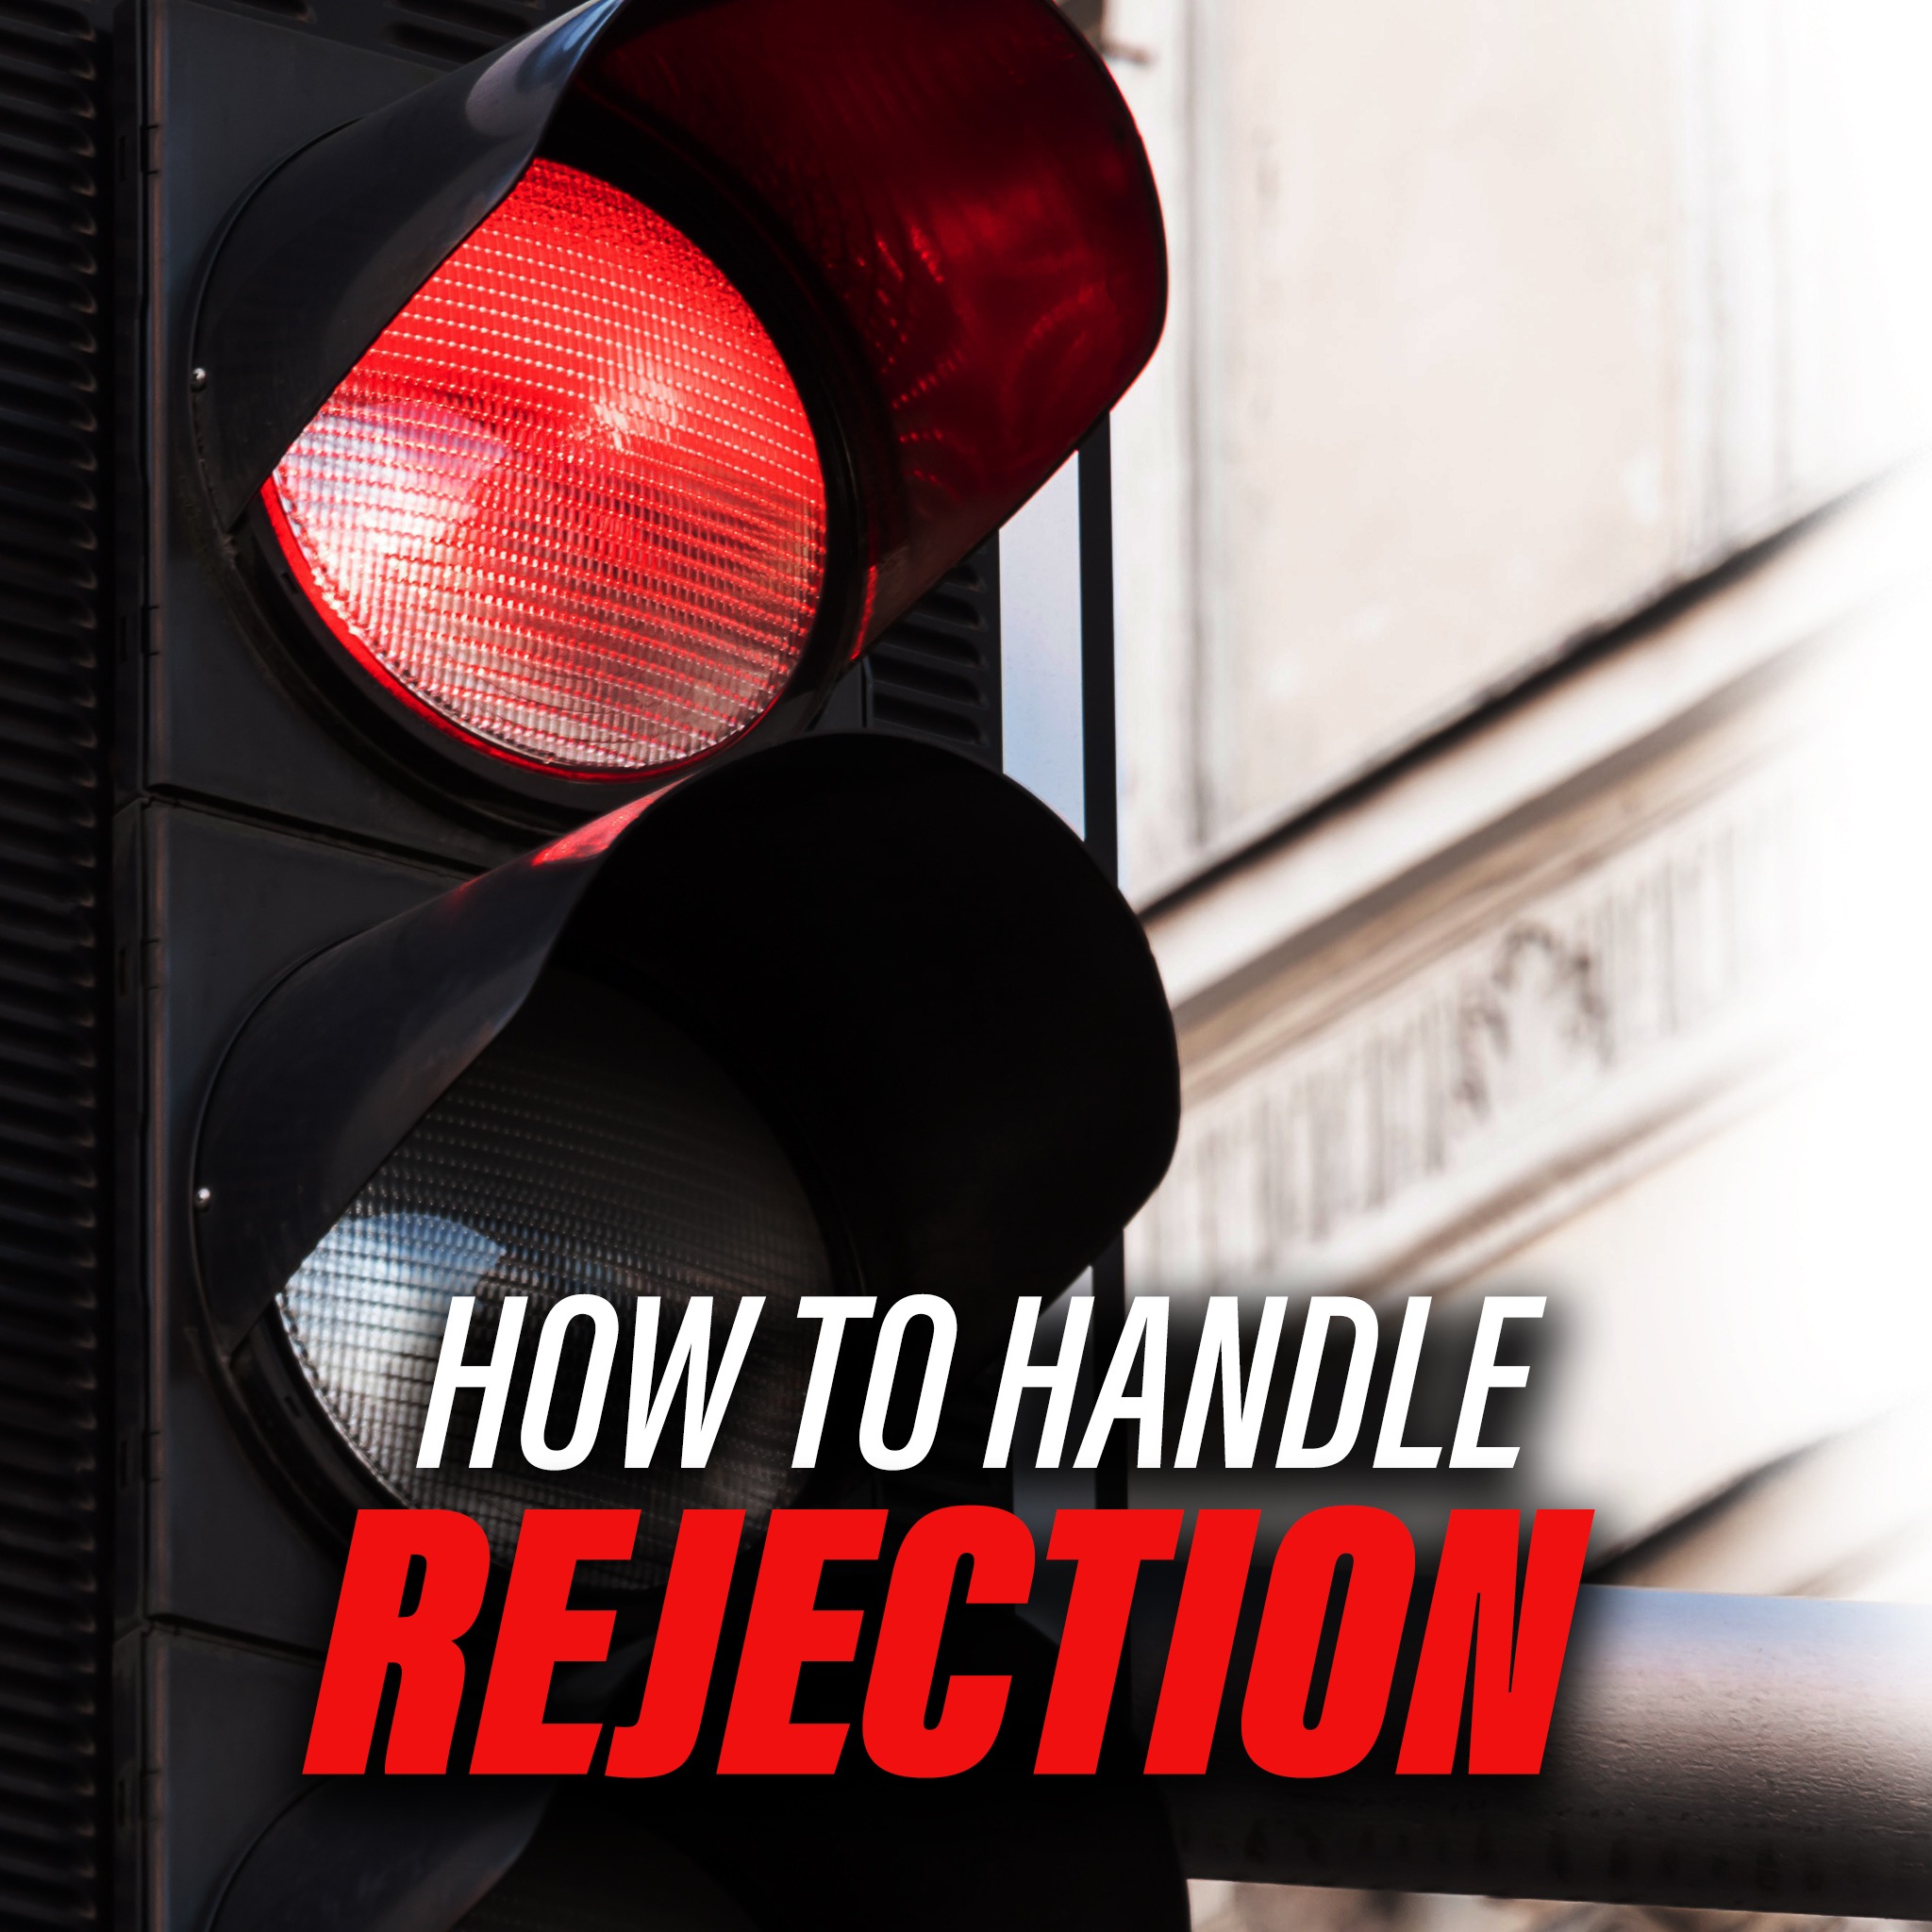 How To Handle Rejection